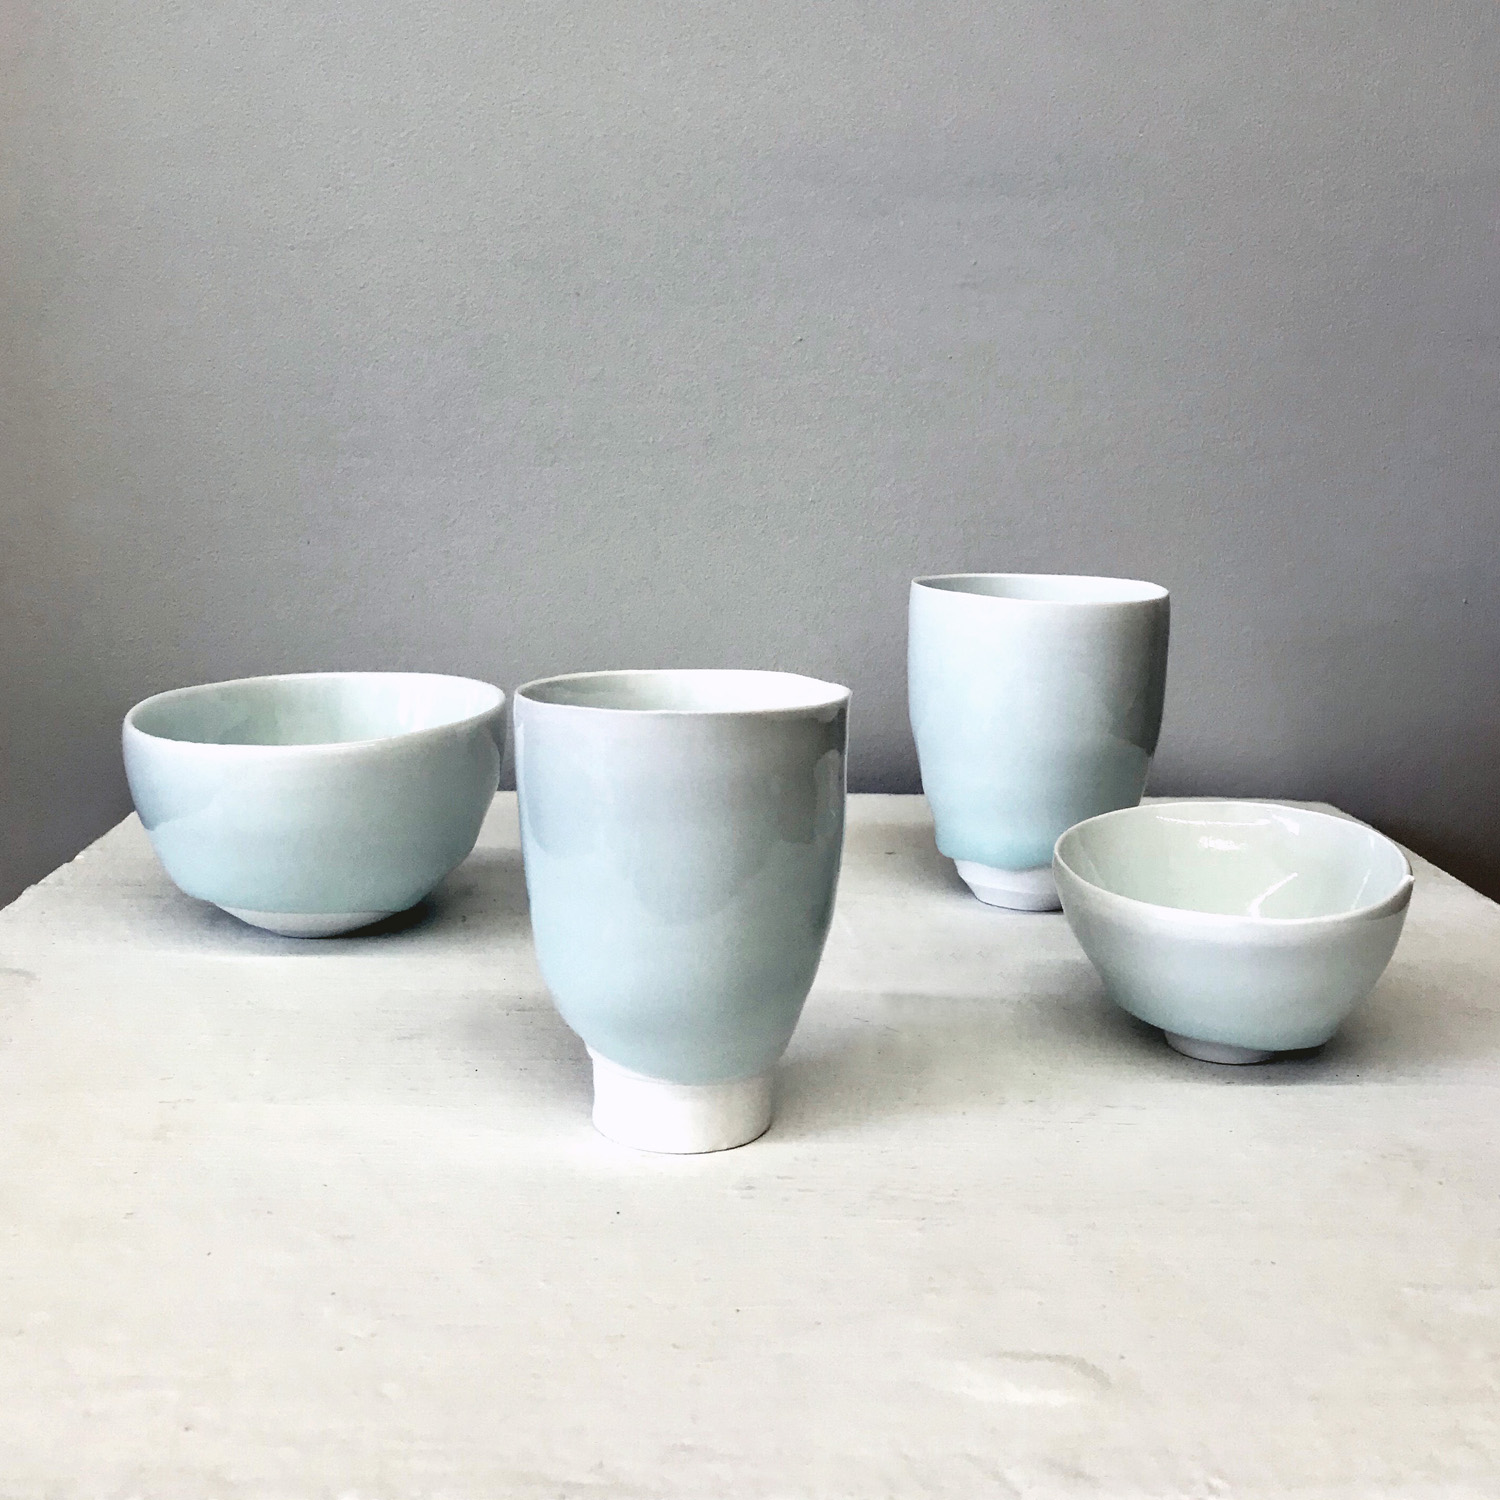 A group of ceramic tableware by Kato Tsubusa